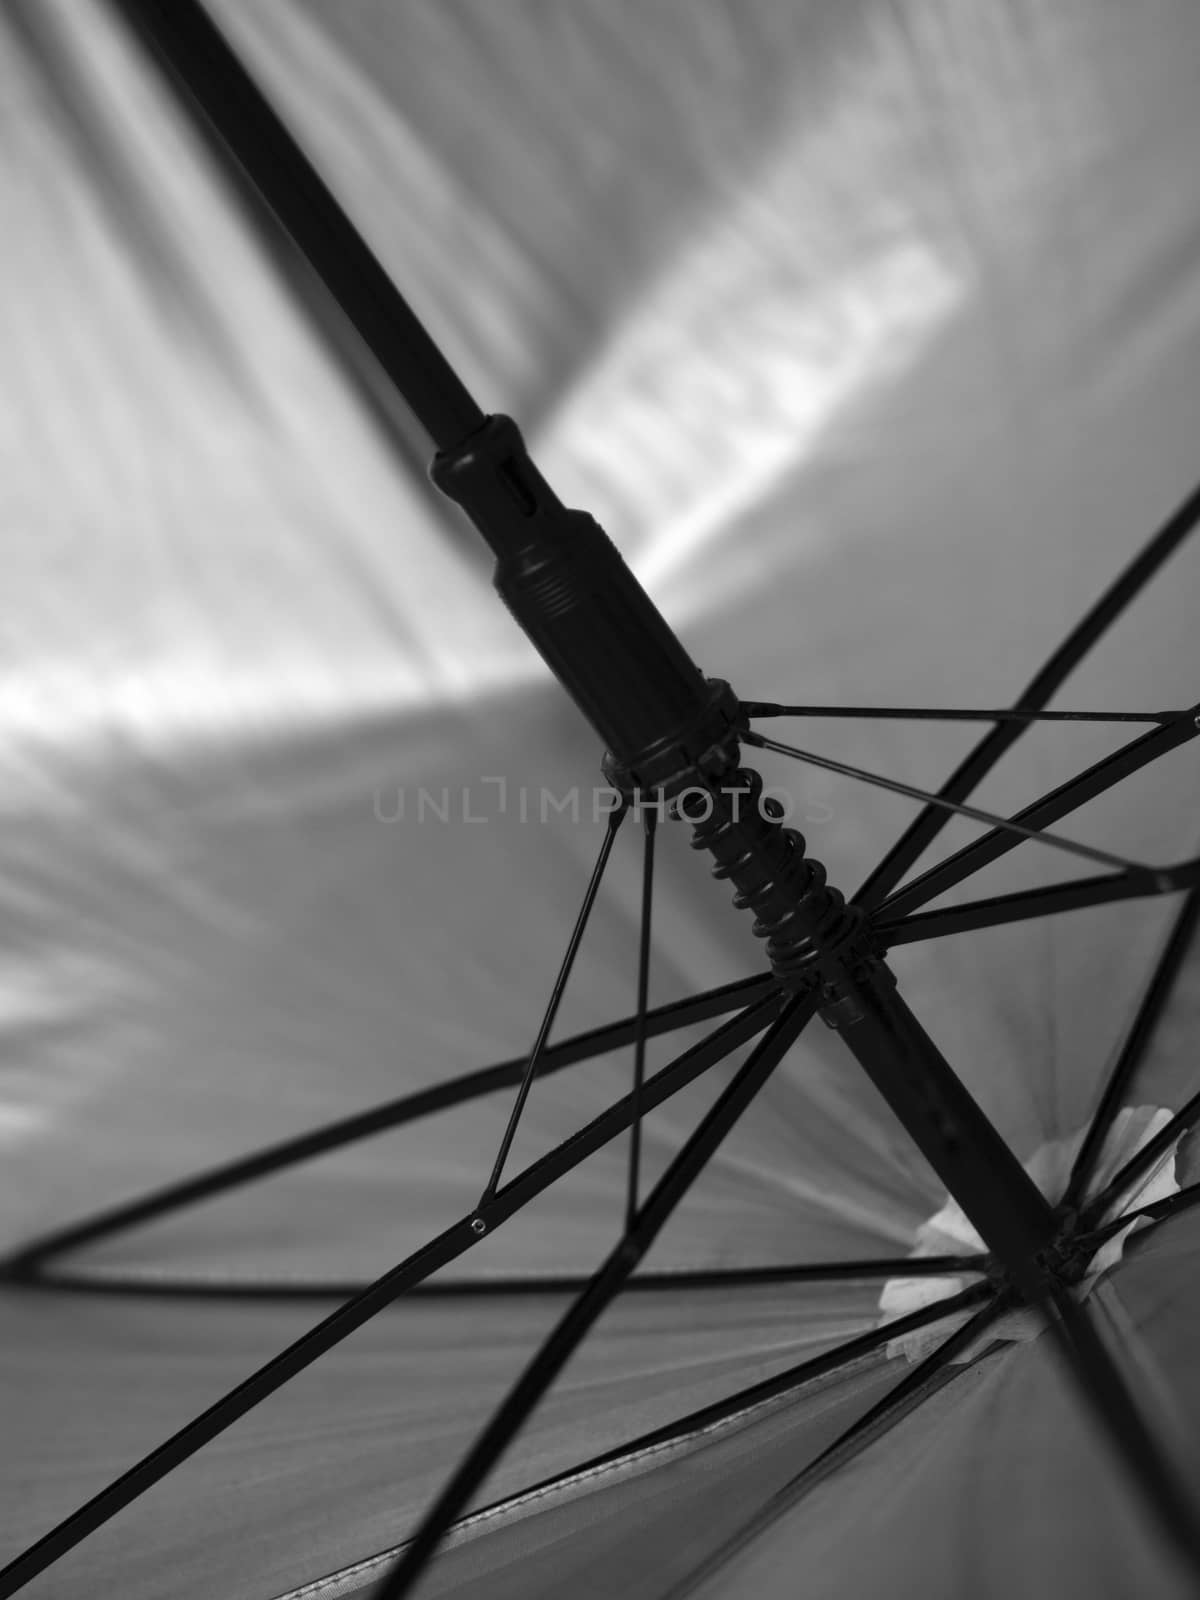 ABSTRACT SHOT OF UMBRELLA FRAME by PrettyTG